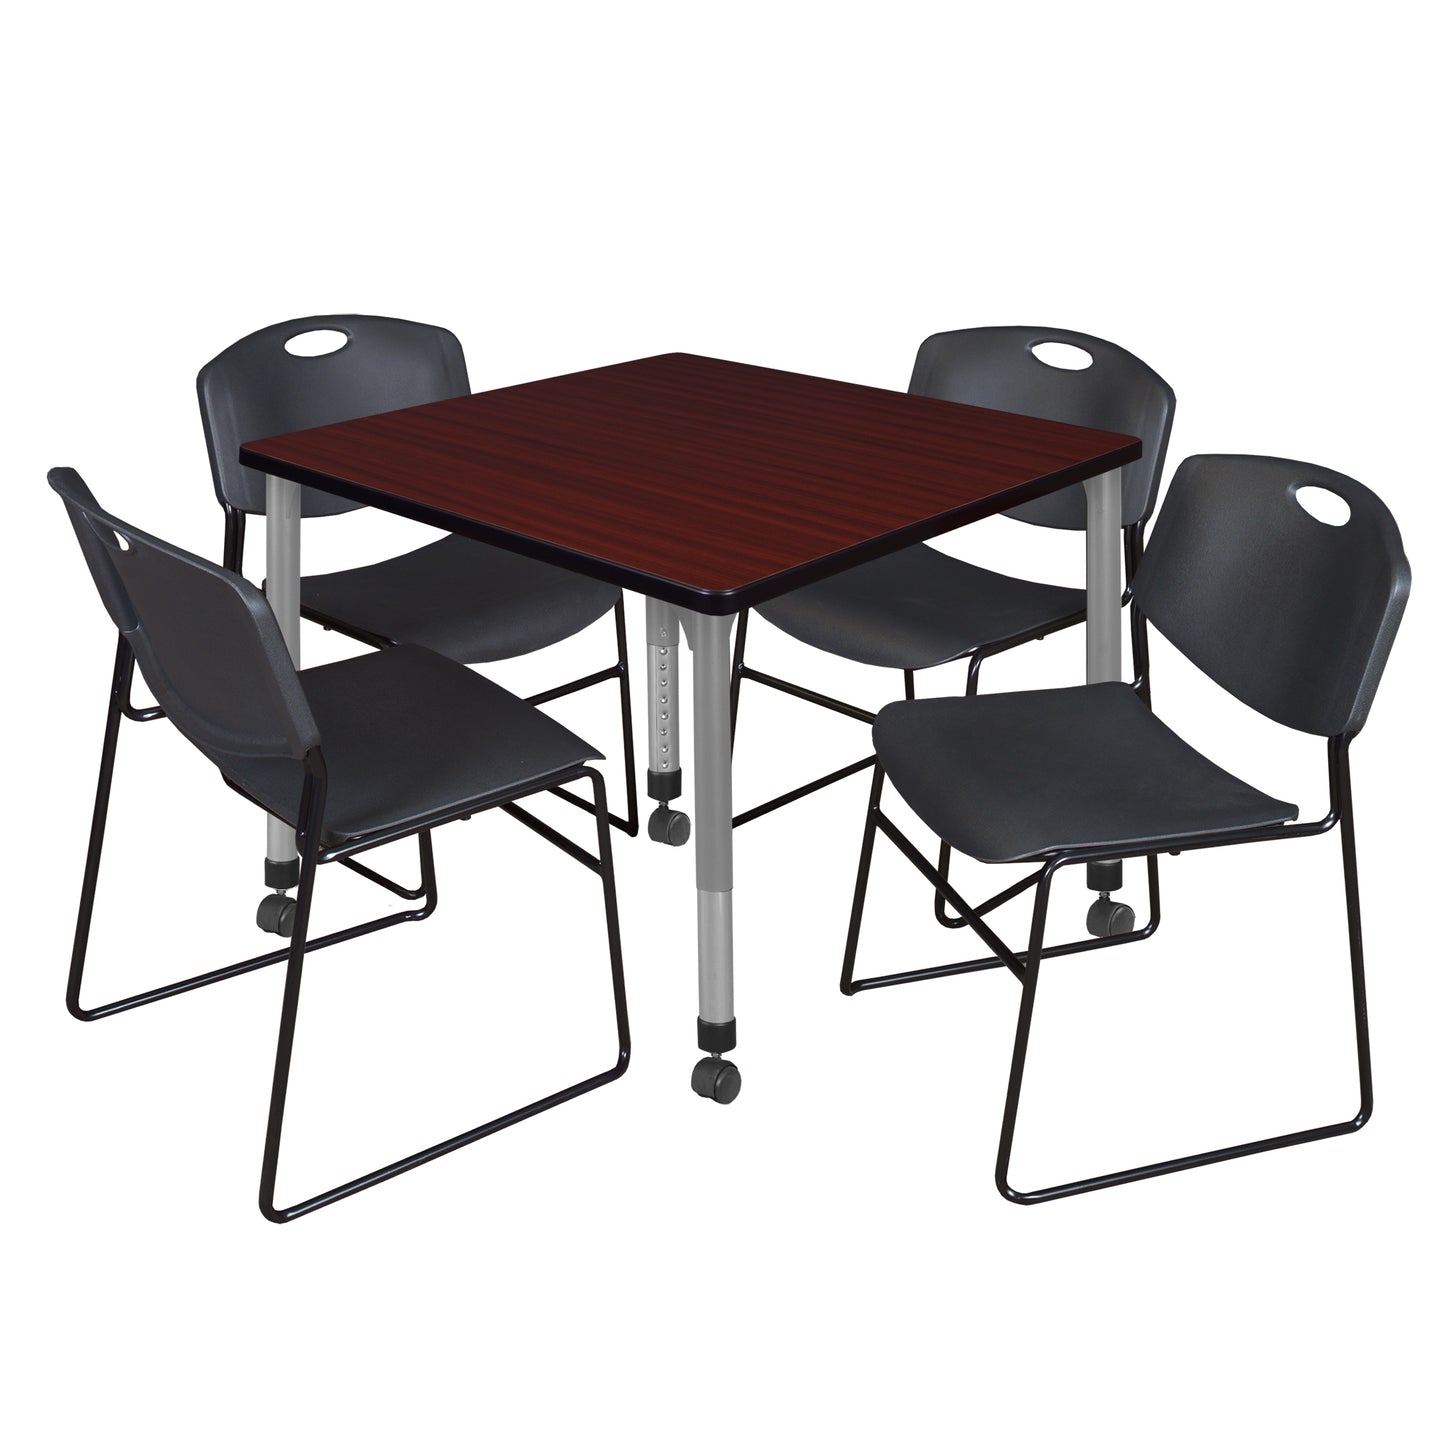 Regency Kee 36 in. Square Adjustable Classroom Table & 4 Zeng Stack Chairs